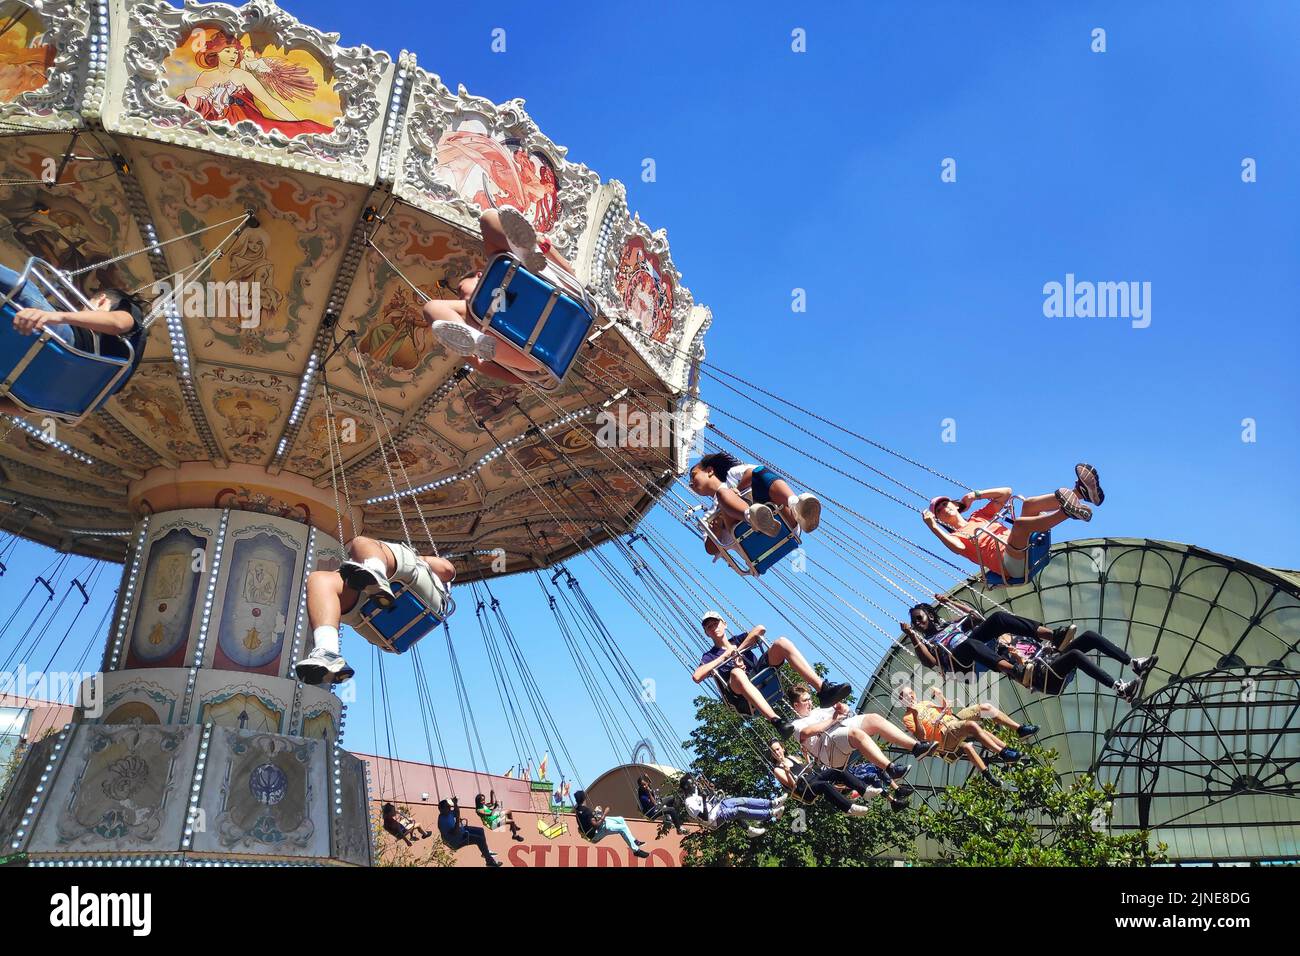 Plailly, France - August 10 2022: Les Chaises volantes is a swing ride located in Parc Astérix, a theme park in France based on the comic book series Stock Photo